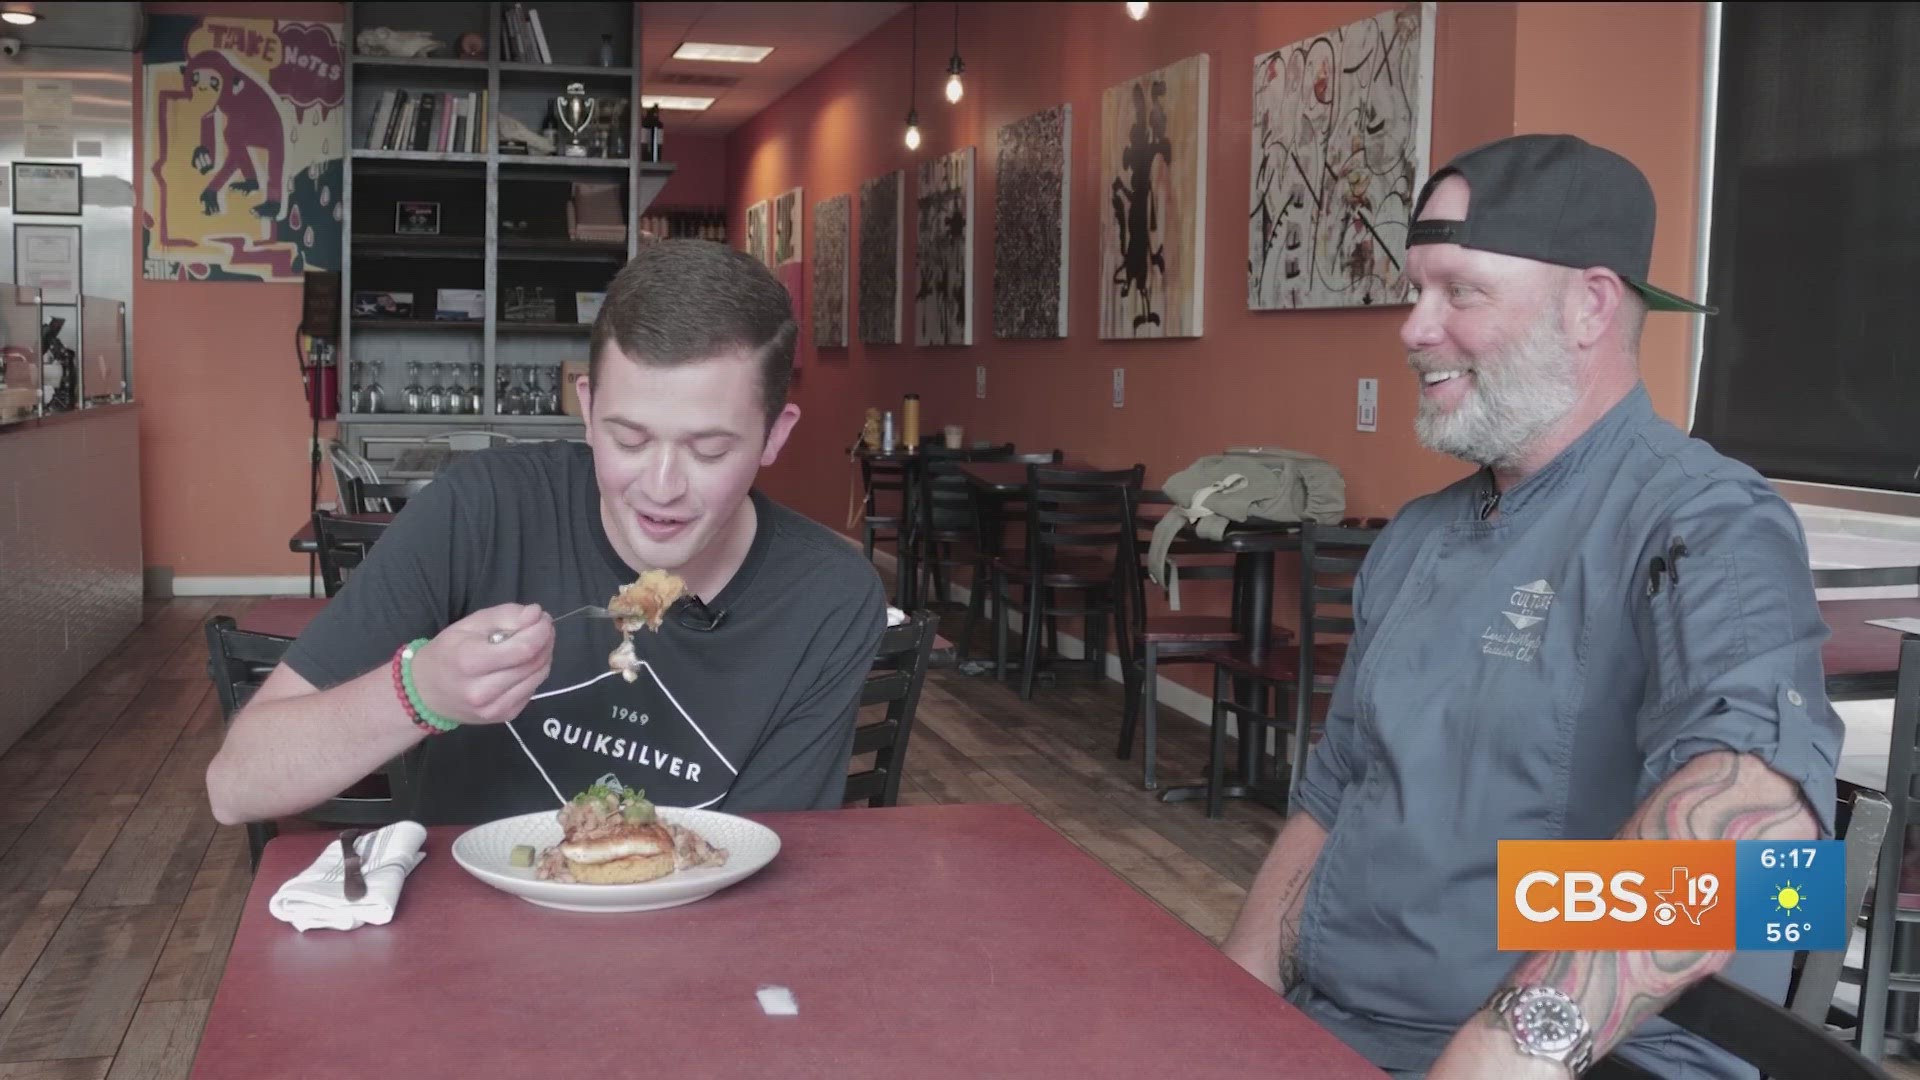 In this week's edition of EATS Texas, we visit Culture ETX in Downtown Tyler.